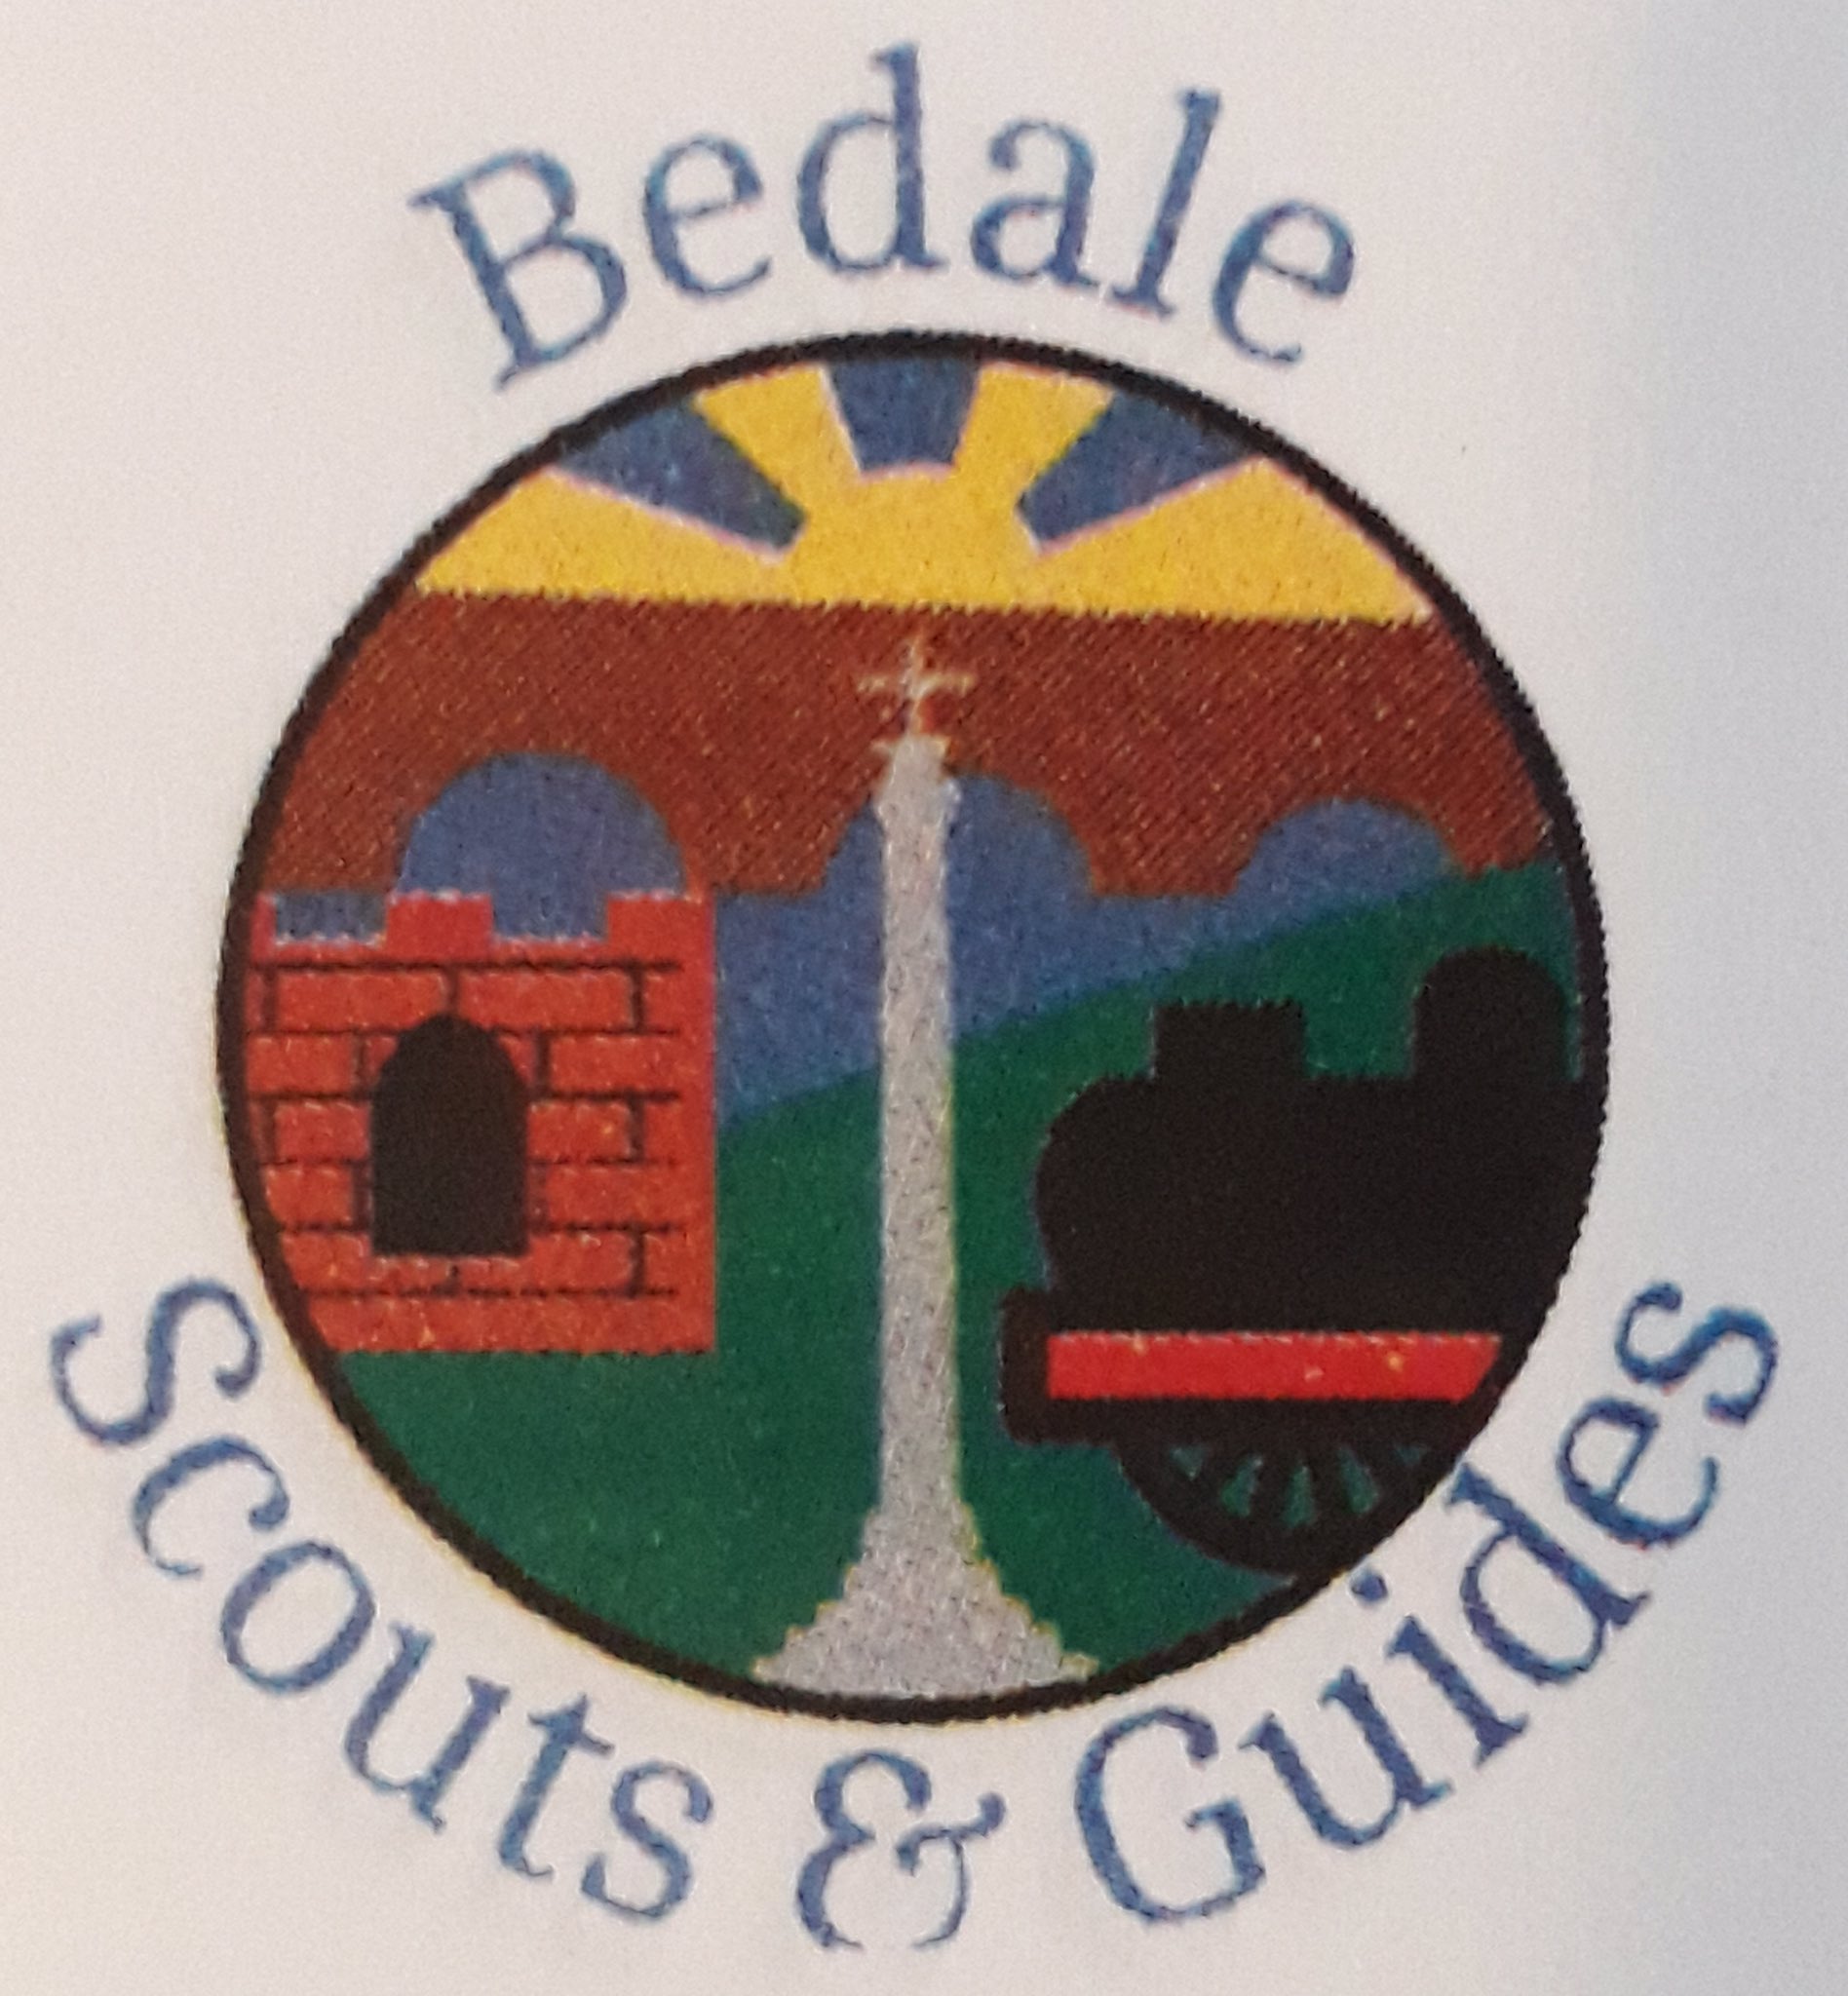 Bedale scout and guide logo